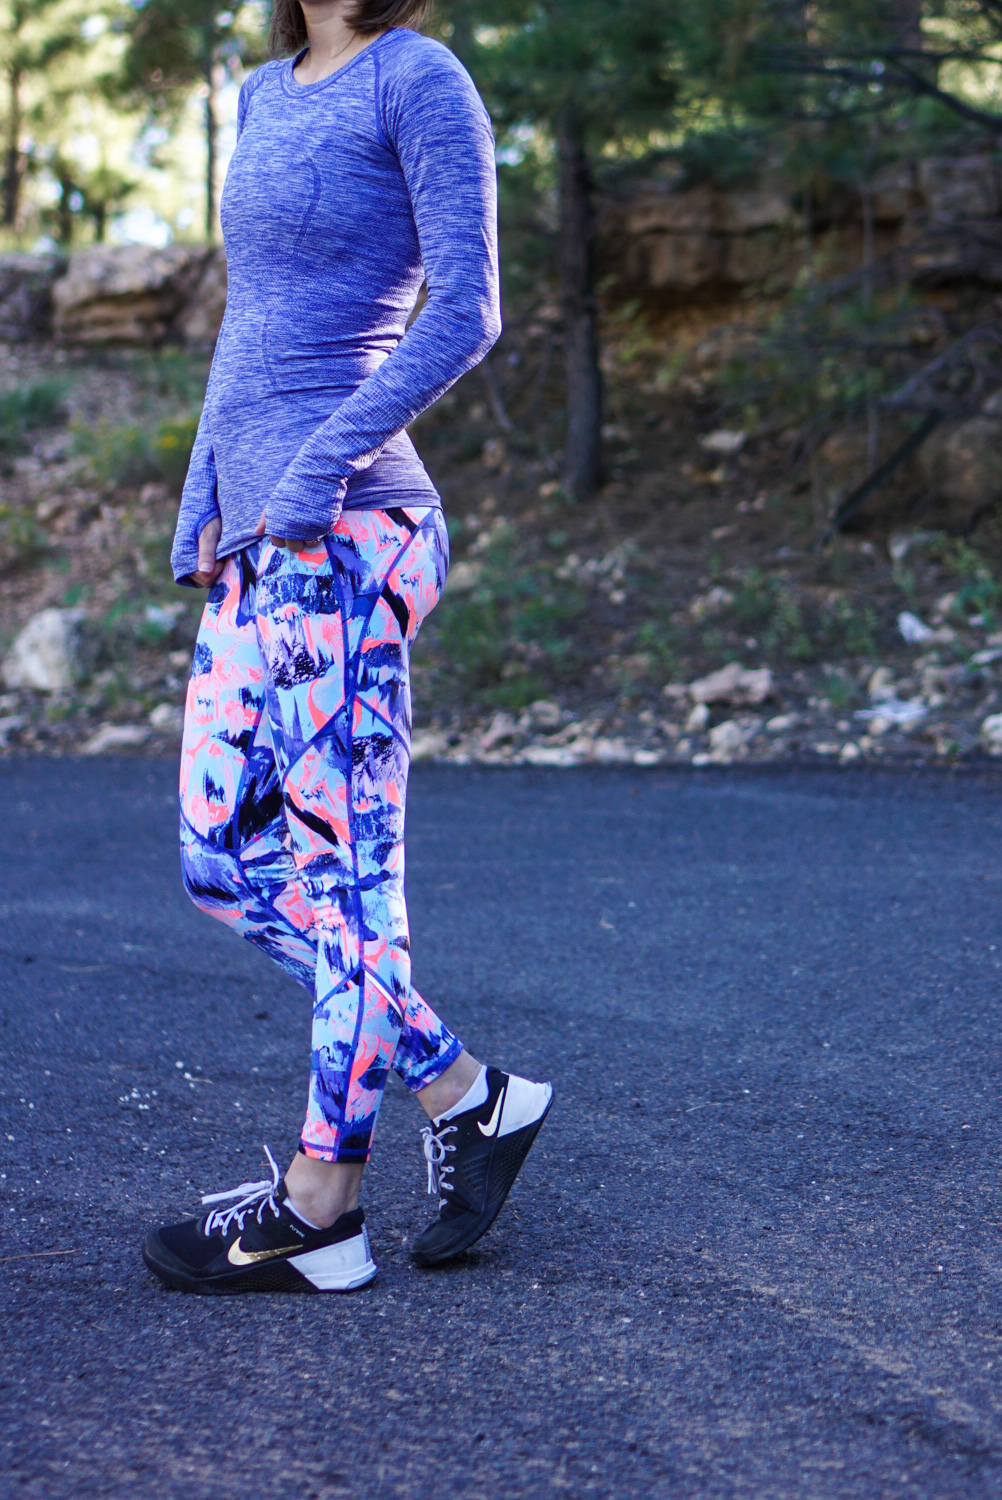 How to Wear Your Printed Or Patterned Leggings